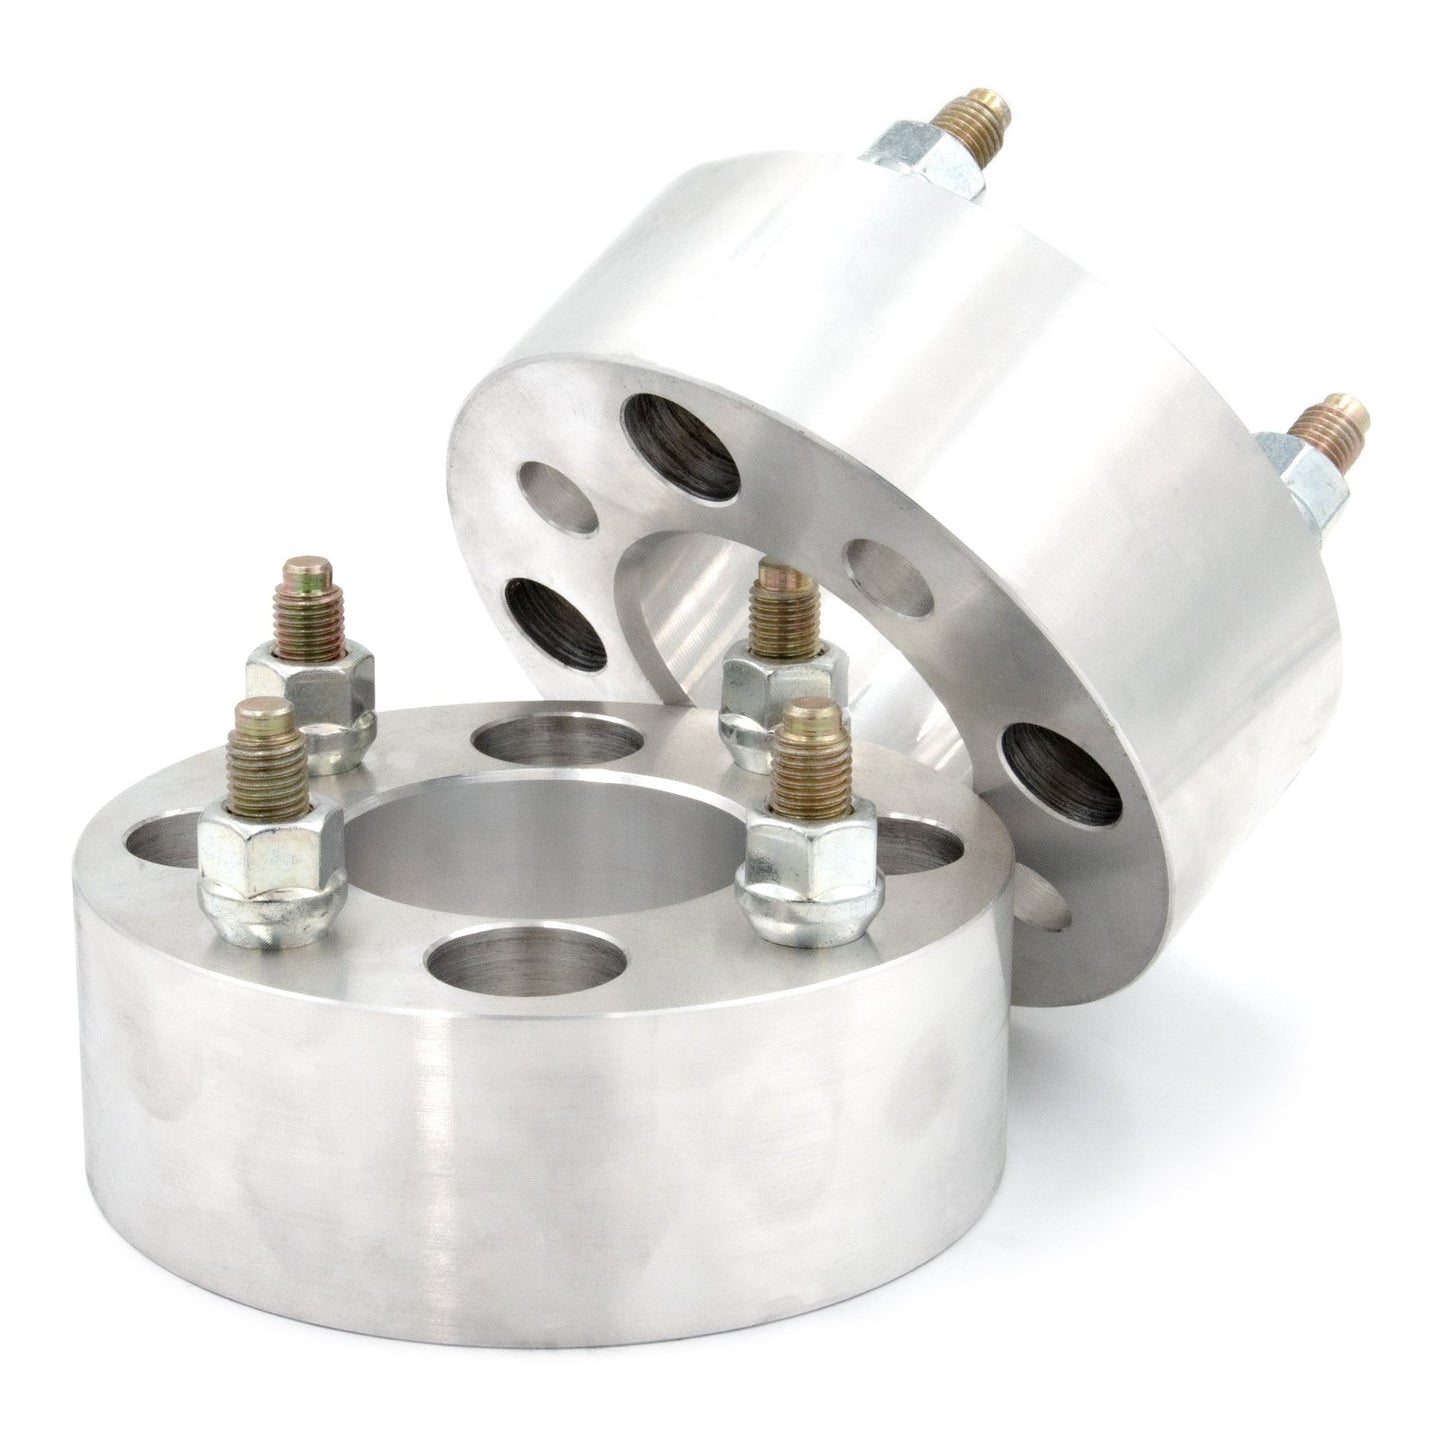 4x110 to 4x137 Wheel Spacer/Adapter - Thickness: 3/4"- 4"